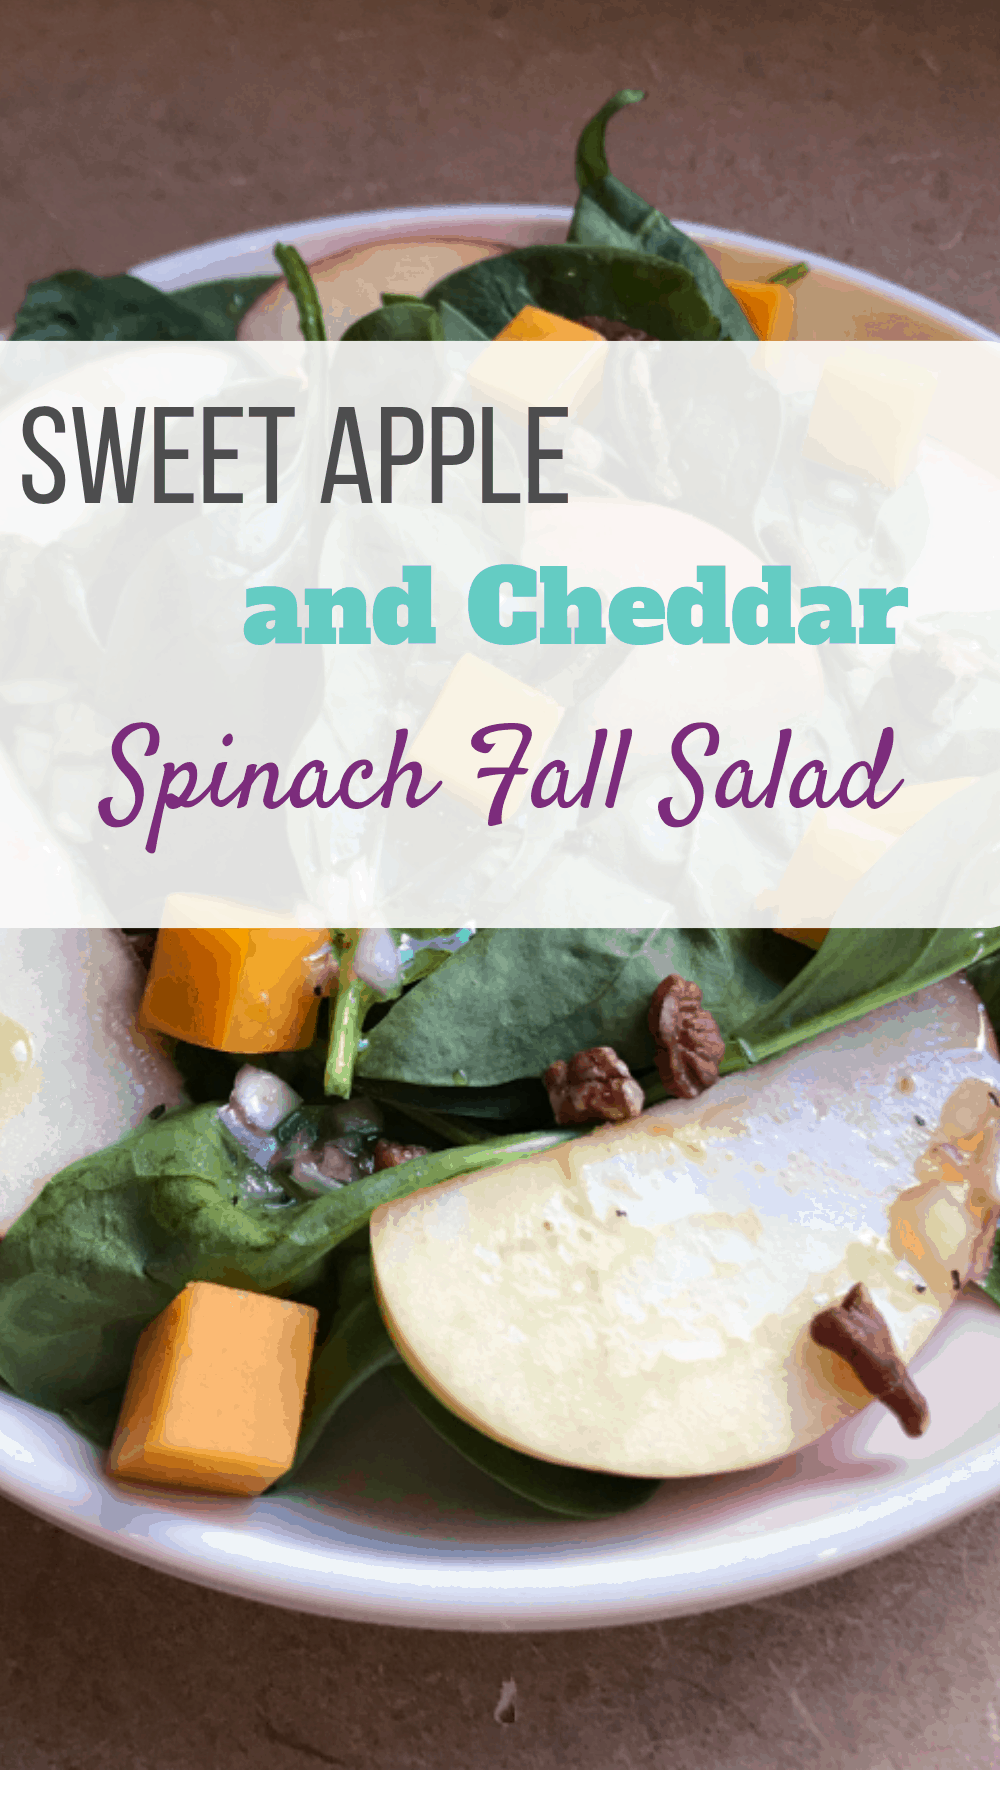 sweet apple and cheddar baby spinach fall salad, fall salad, healthy fall salad, fall inspired salad, fall salad recipe, fall salads with apples, fall salads, fall salads for parties, #fallsalad #fallsalads #fallrecipes #applesalad #spinachapplesalad